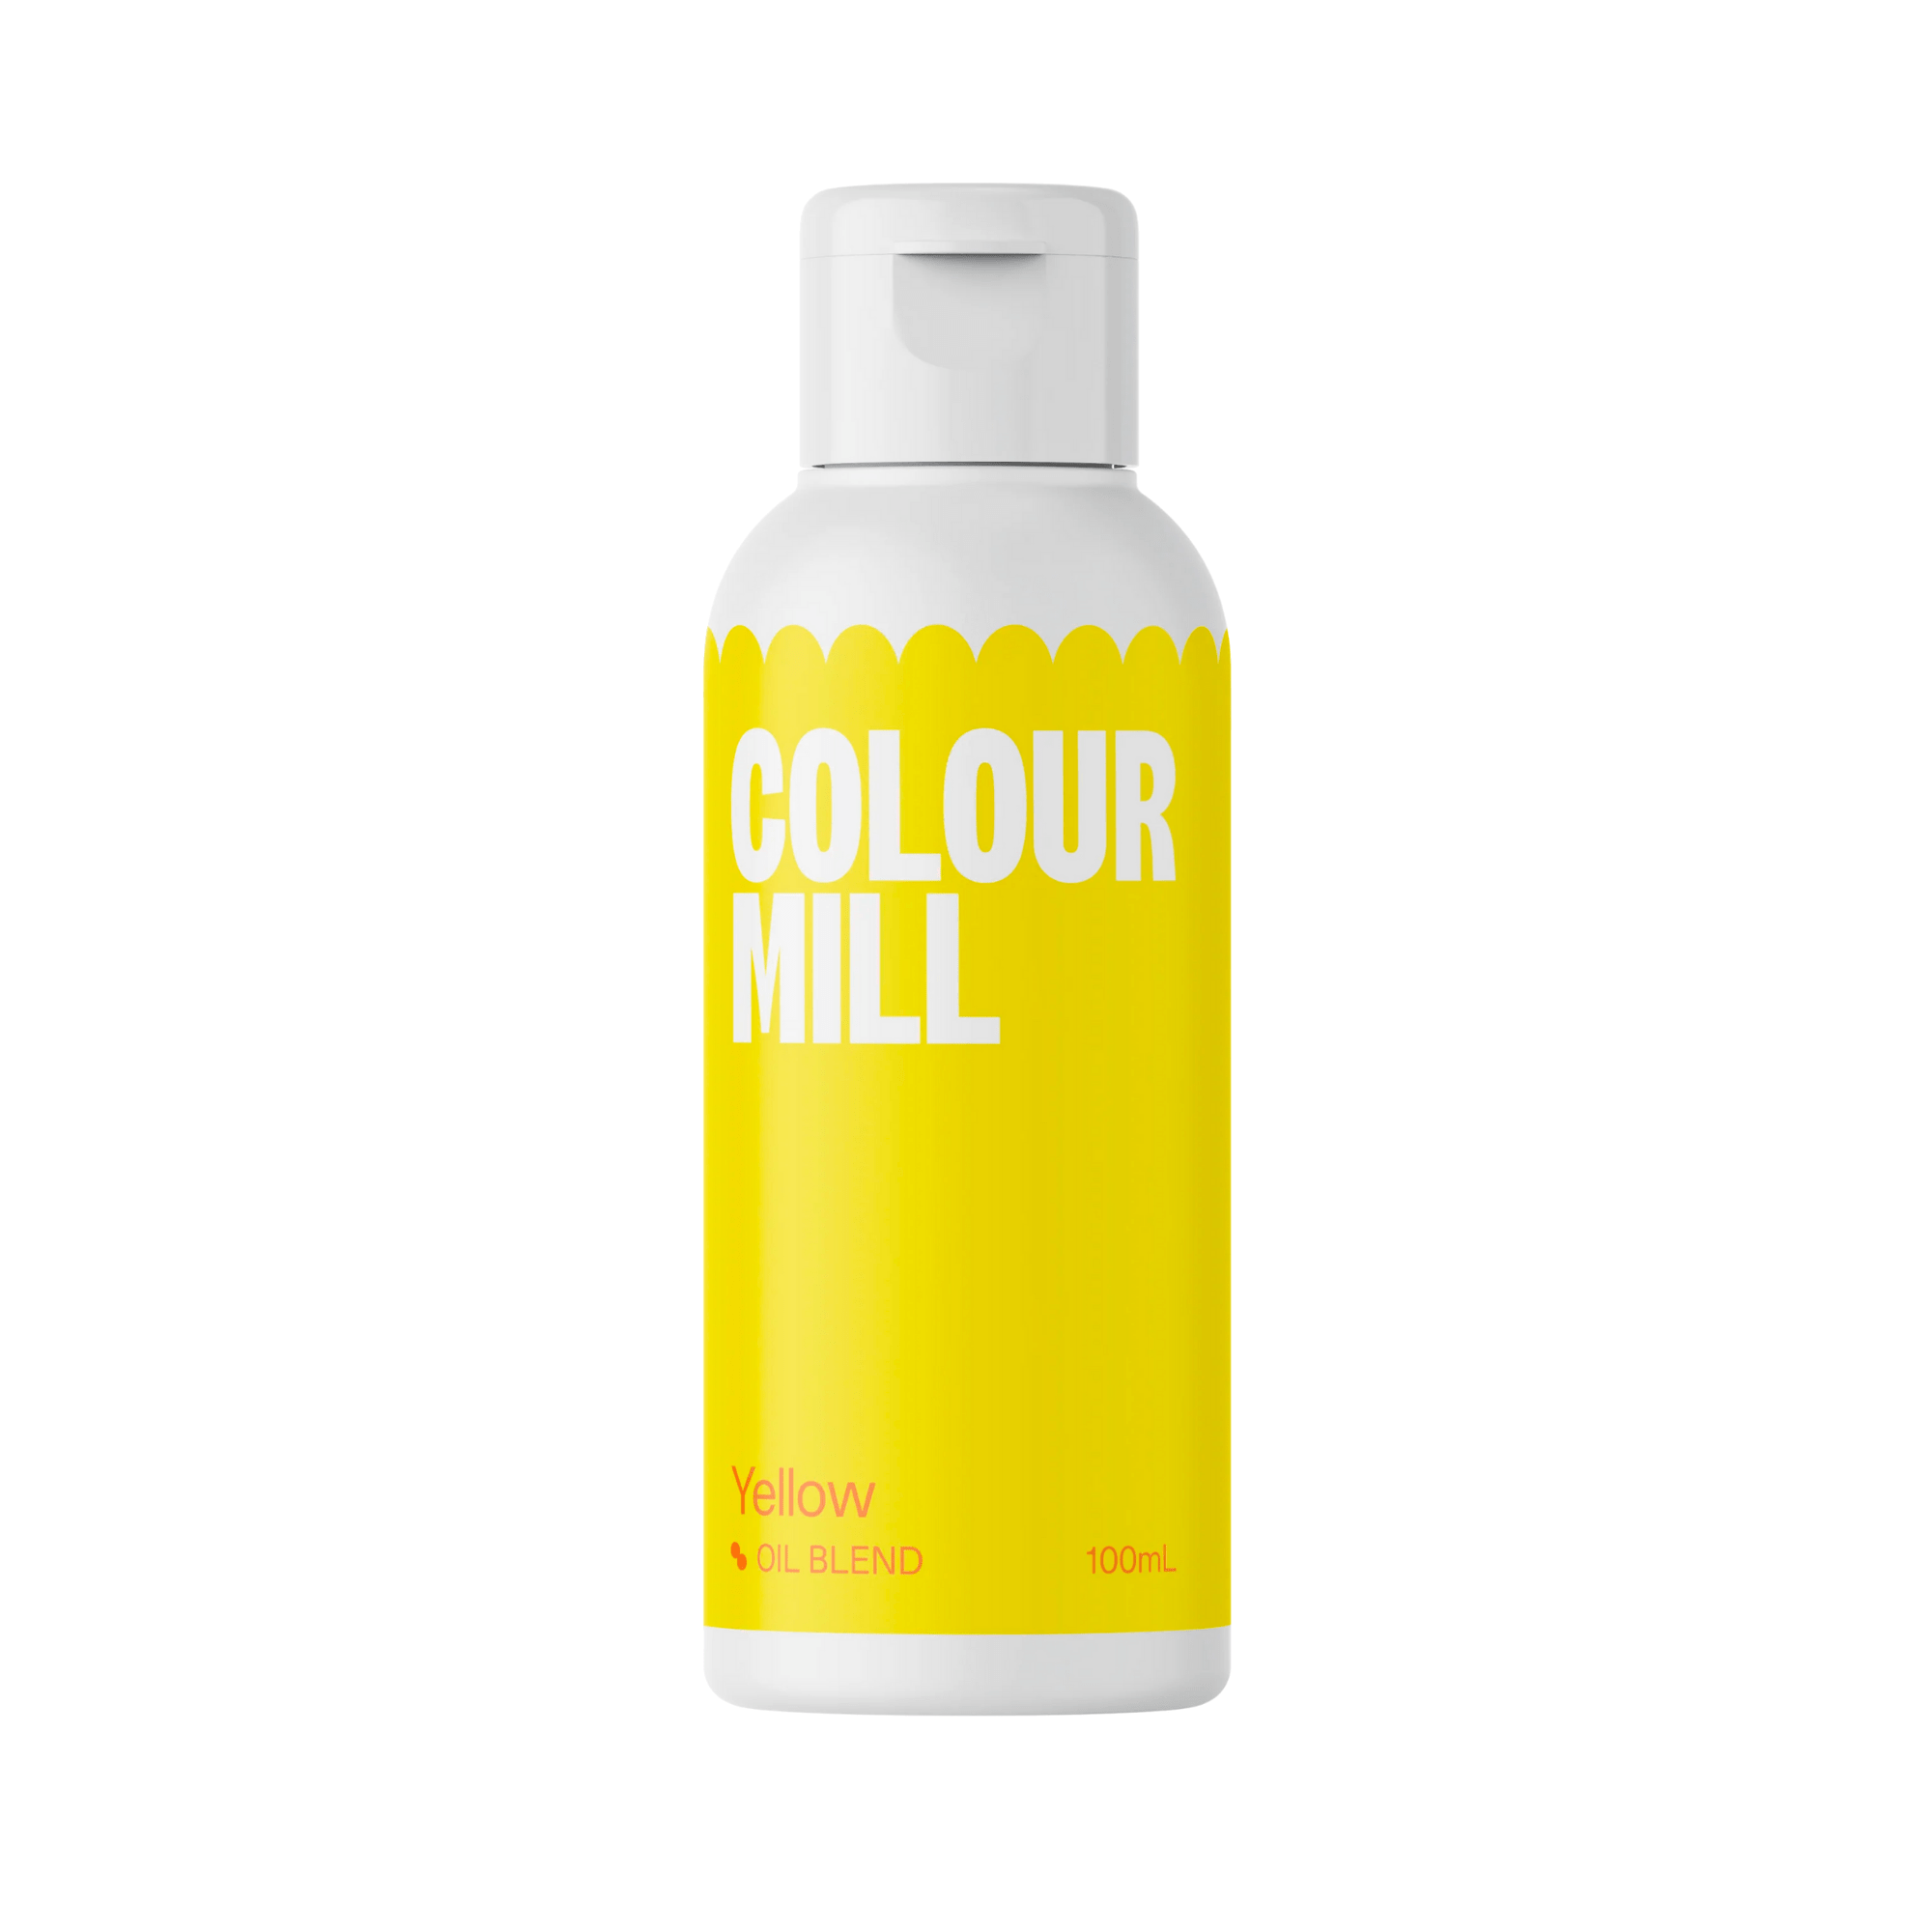 Happy Sprinkles Streusel 100ml Colour Mill Yellow - Oil Blend